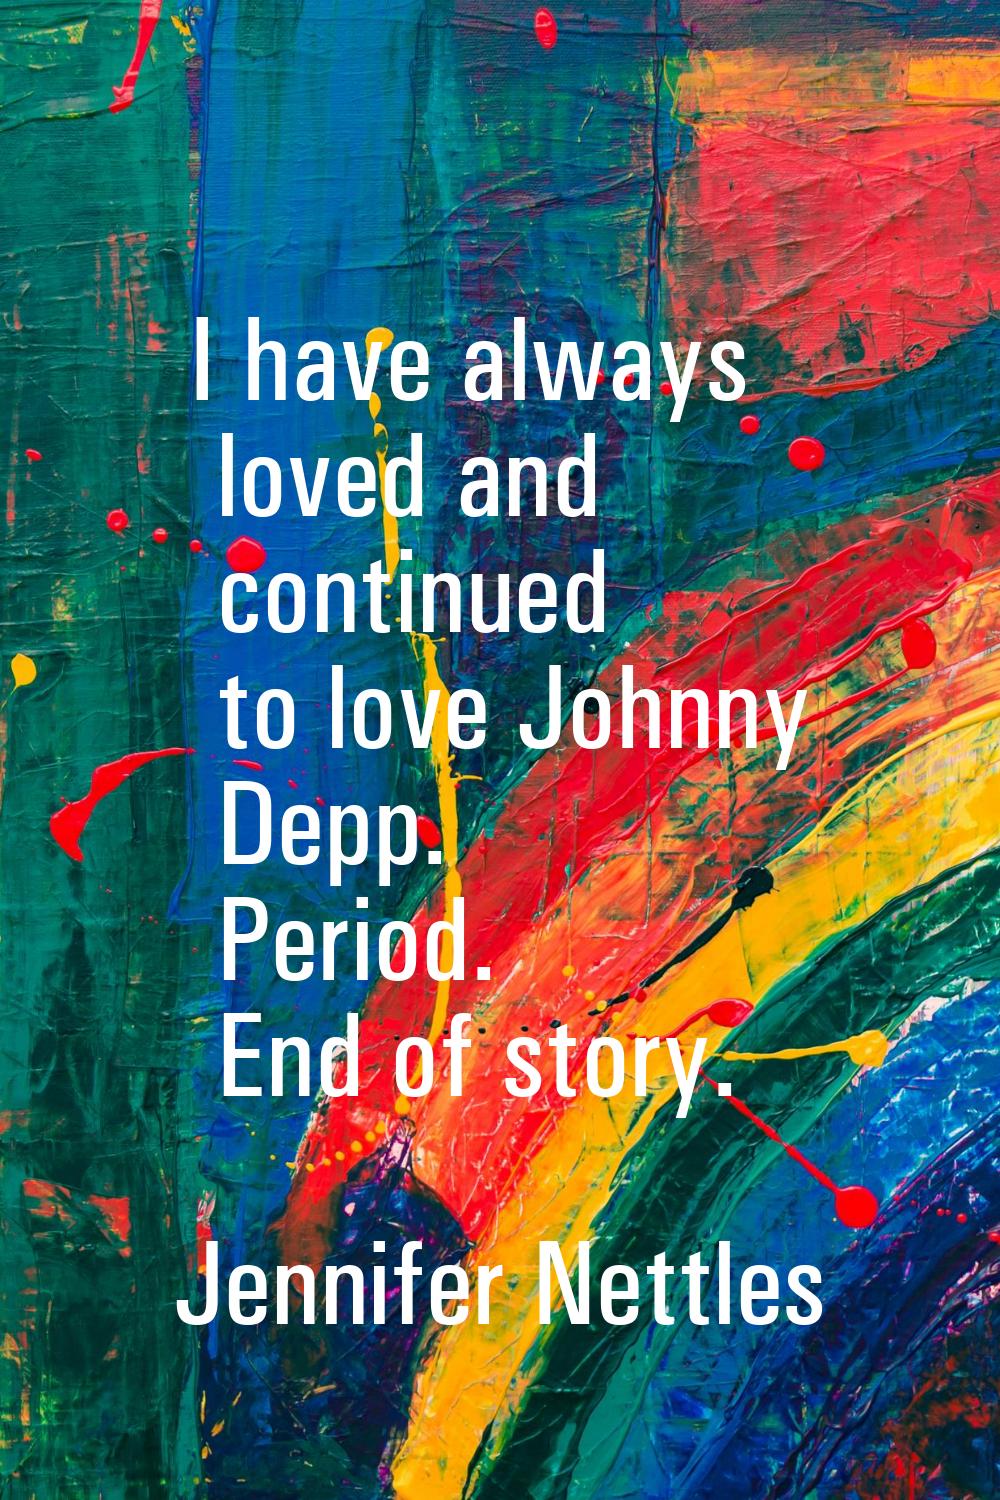 I have always loved and continued to love Johnny Depp. Period. End of story.